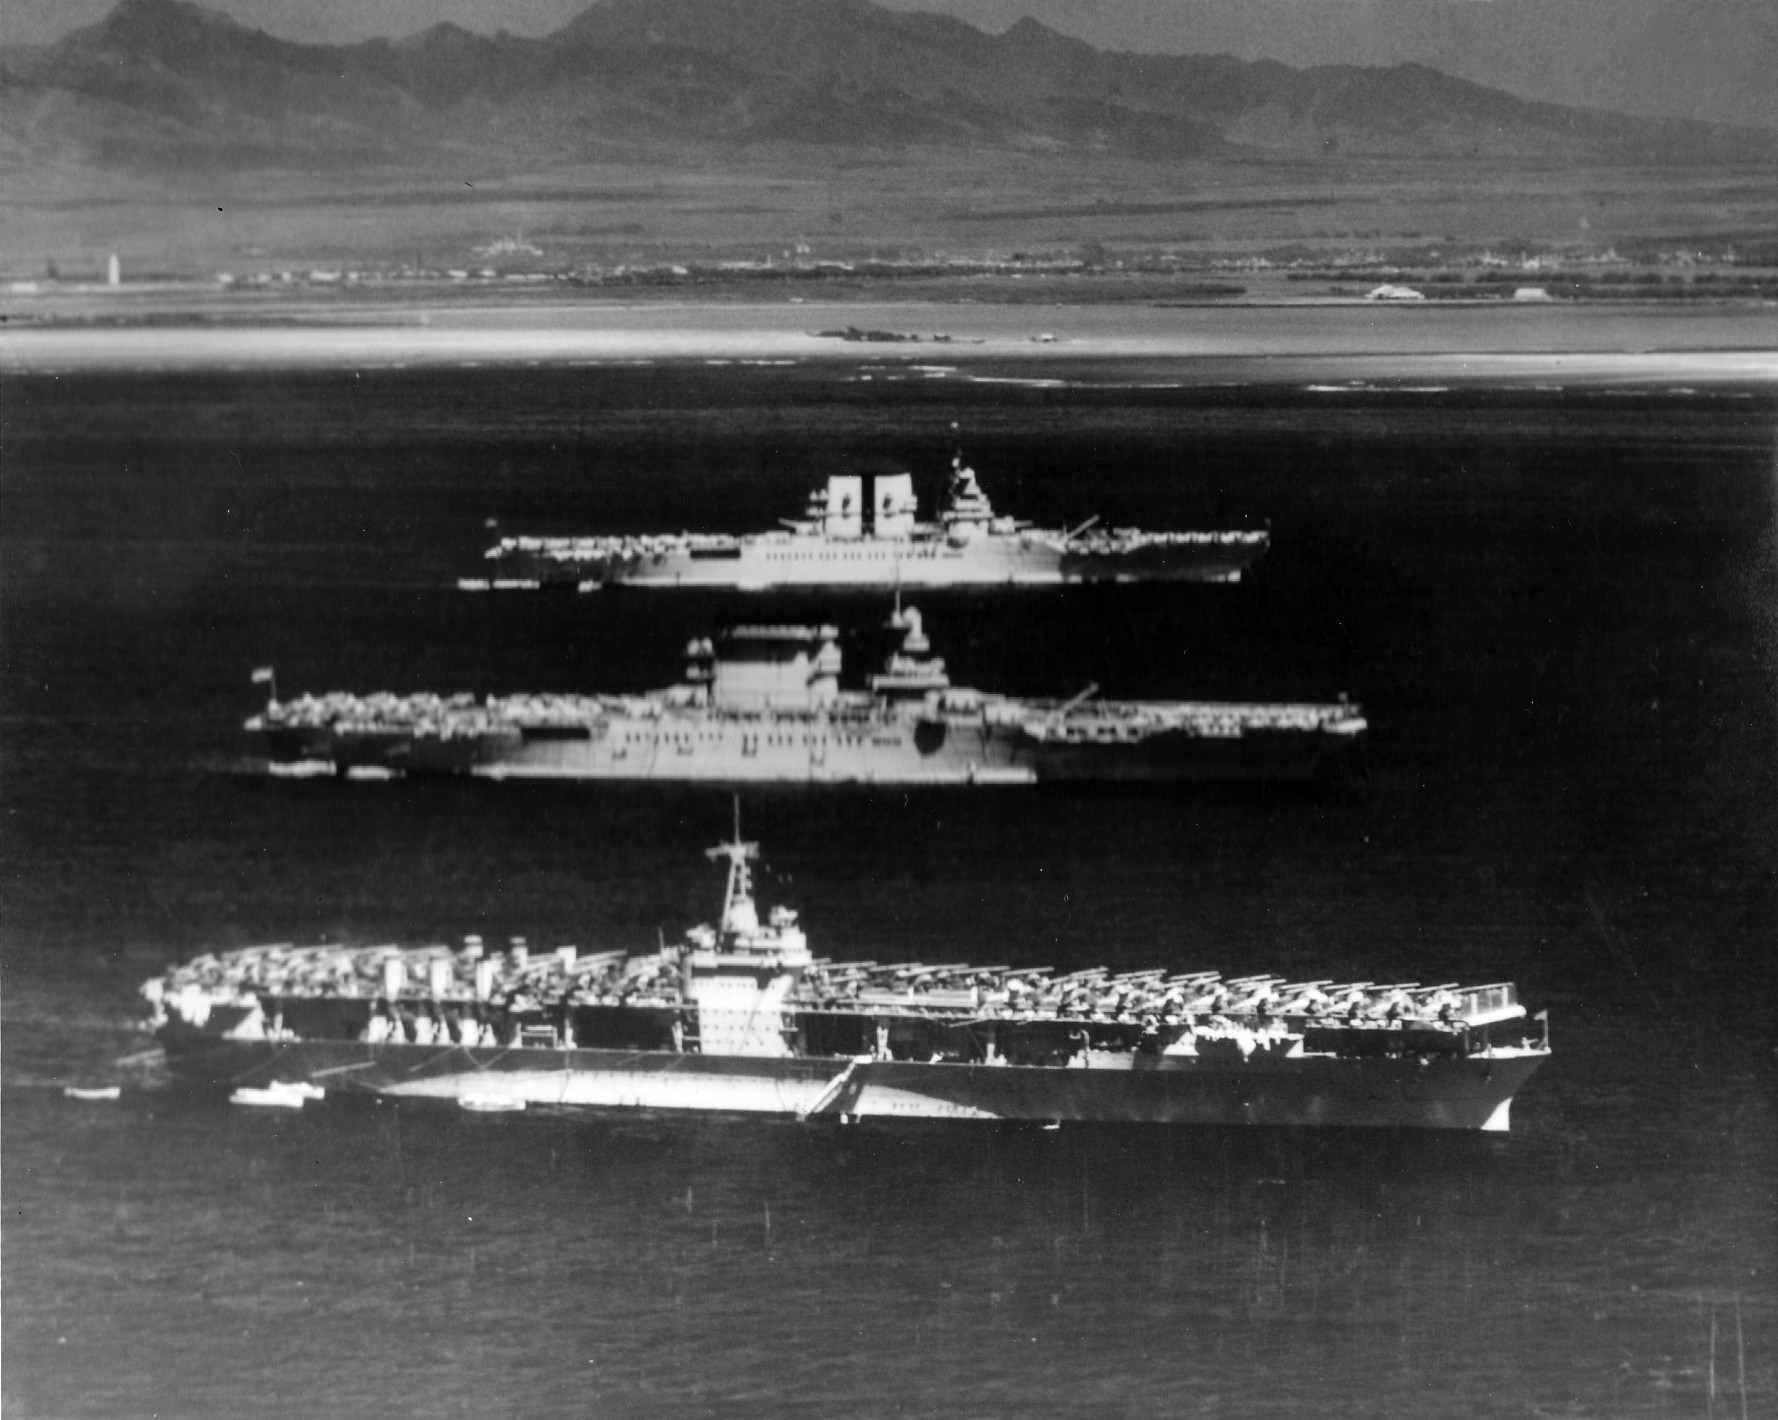 USS Ranger (foreground), USS Lexington (center), and USS Saratoga (background) at anchor off Honolulu, US Territory of Hawaii, 8 Apr 1936